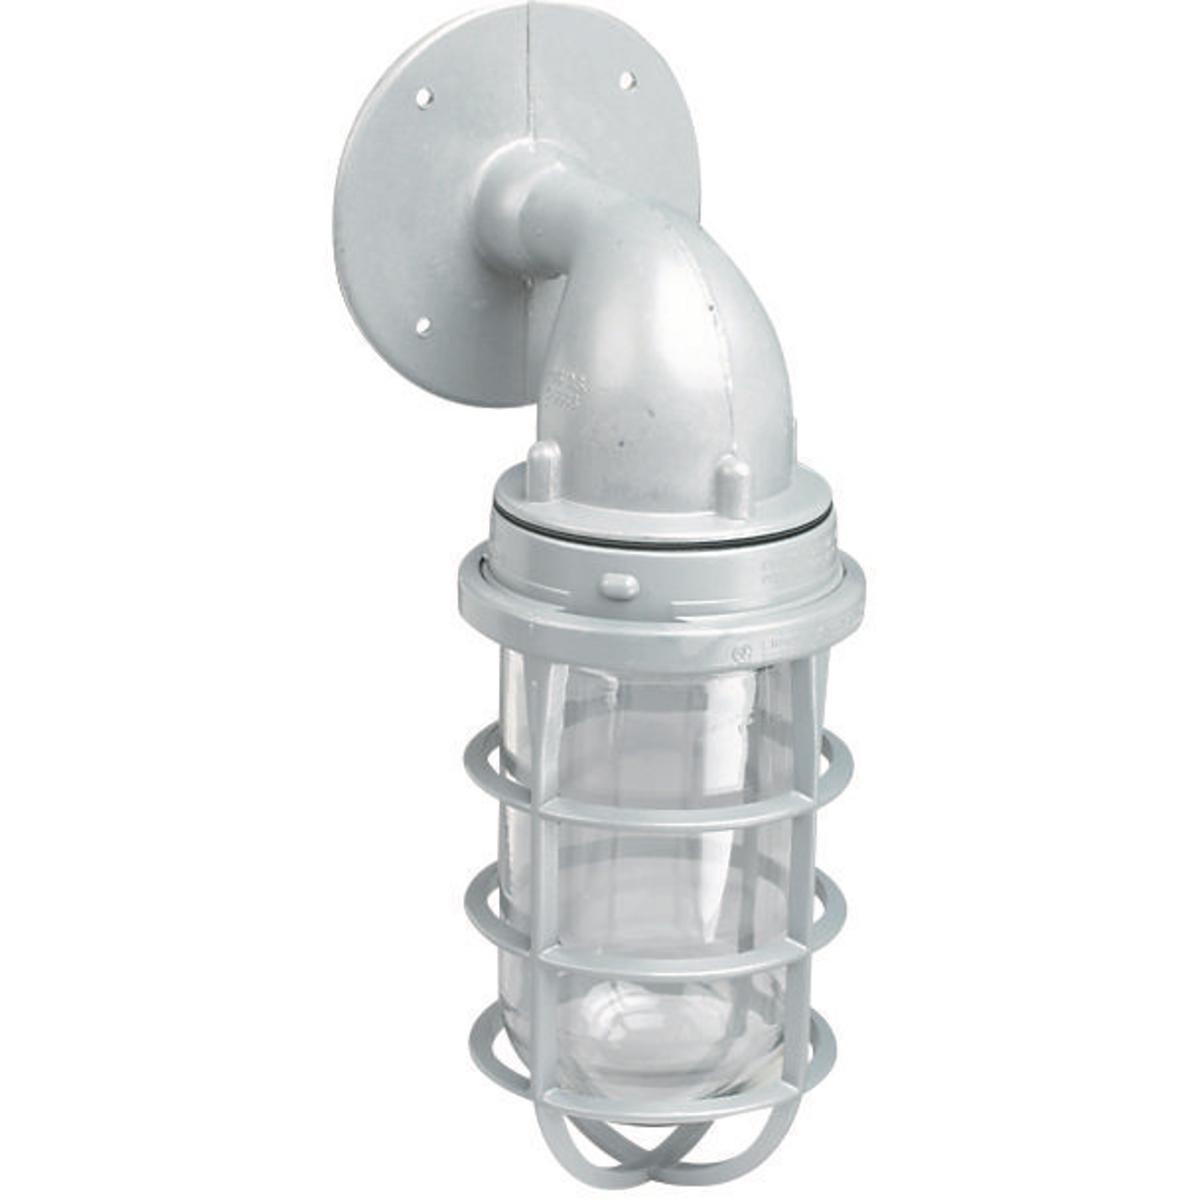 Hubbell VFBG-2-100 100W V Series Incandescent 3/4" Wall Mount to VBC Splice Box  ; Electrostatically applied epoxy/polyester finish ; Modular design ; Hubs are threaded for attachment to conduit ; Set screws in pendant fixture ; Copper-free aluminum (less than .004%) ; The 